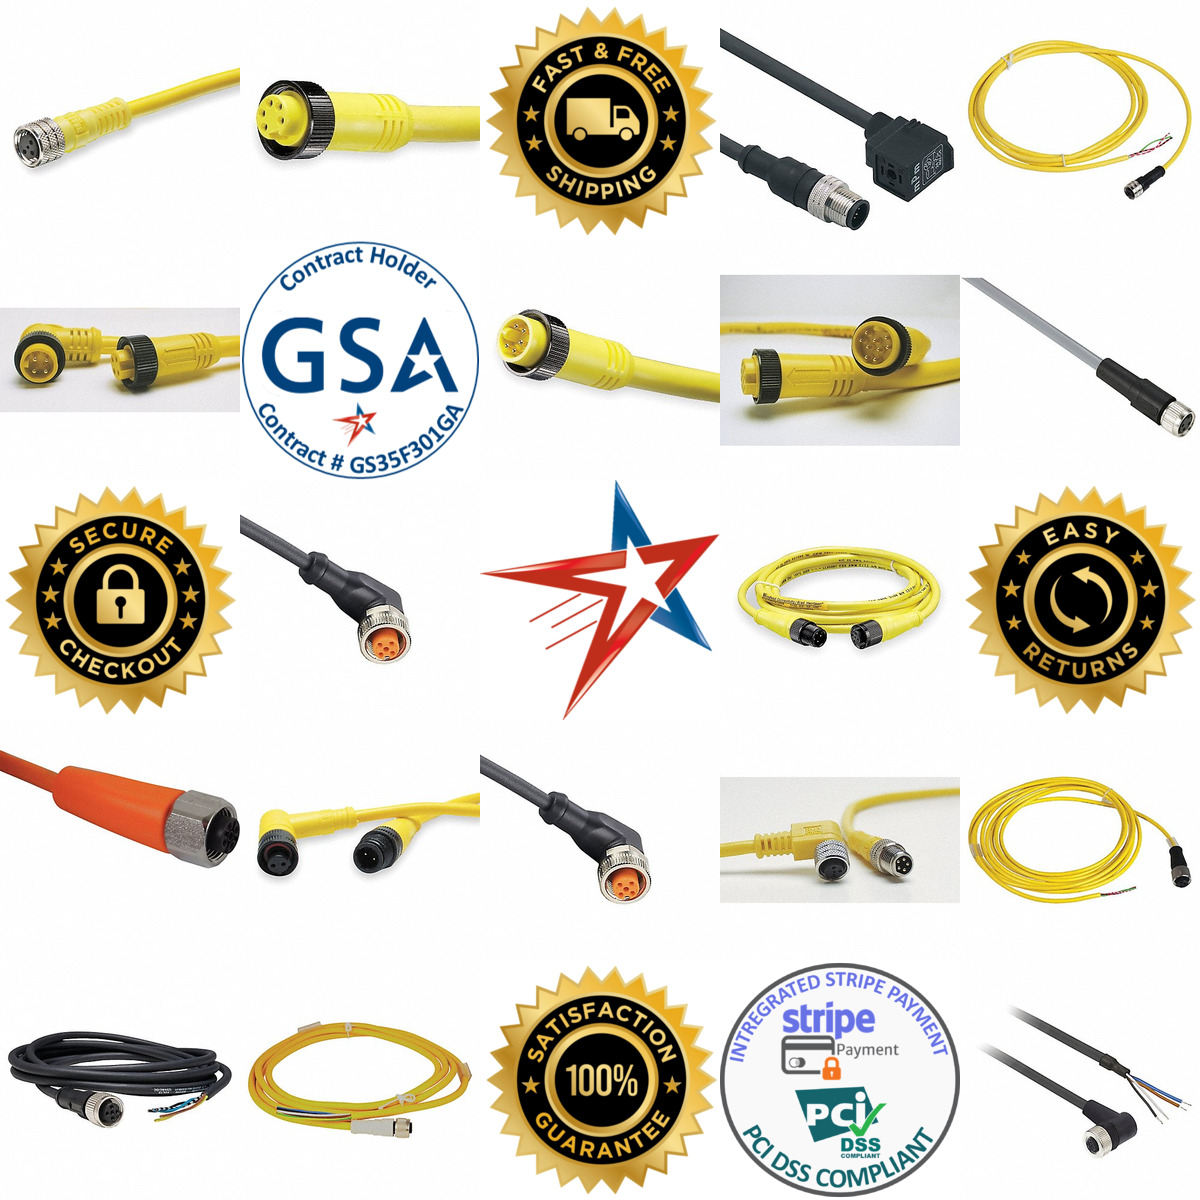 A selection of Sensor Cordsets products on GoVets